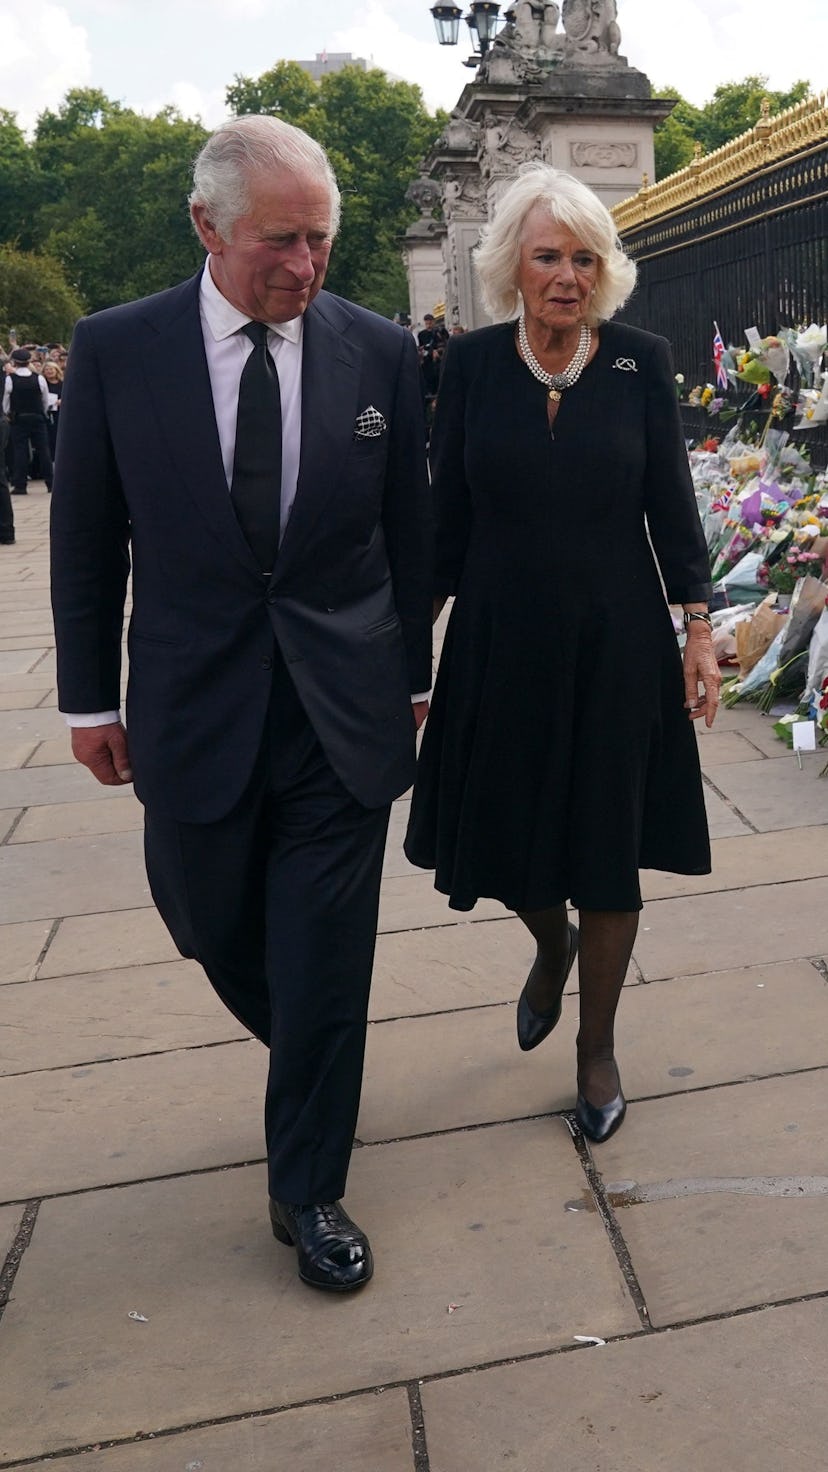 King Charles III and Camilla, Queen Consort. 